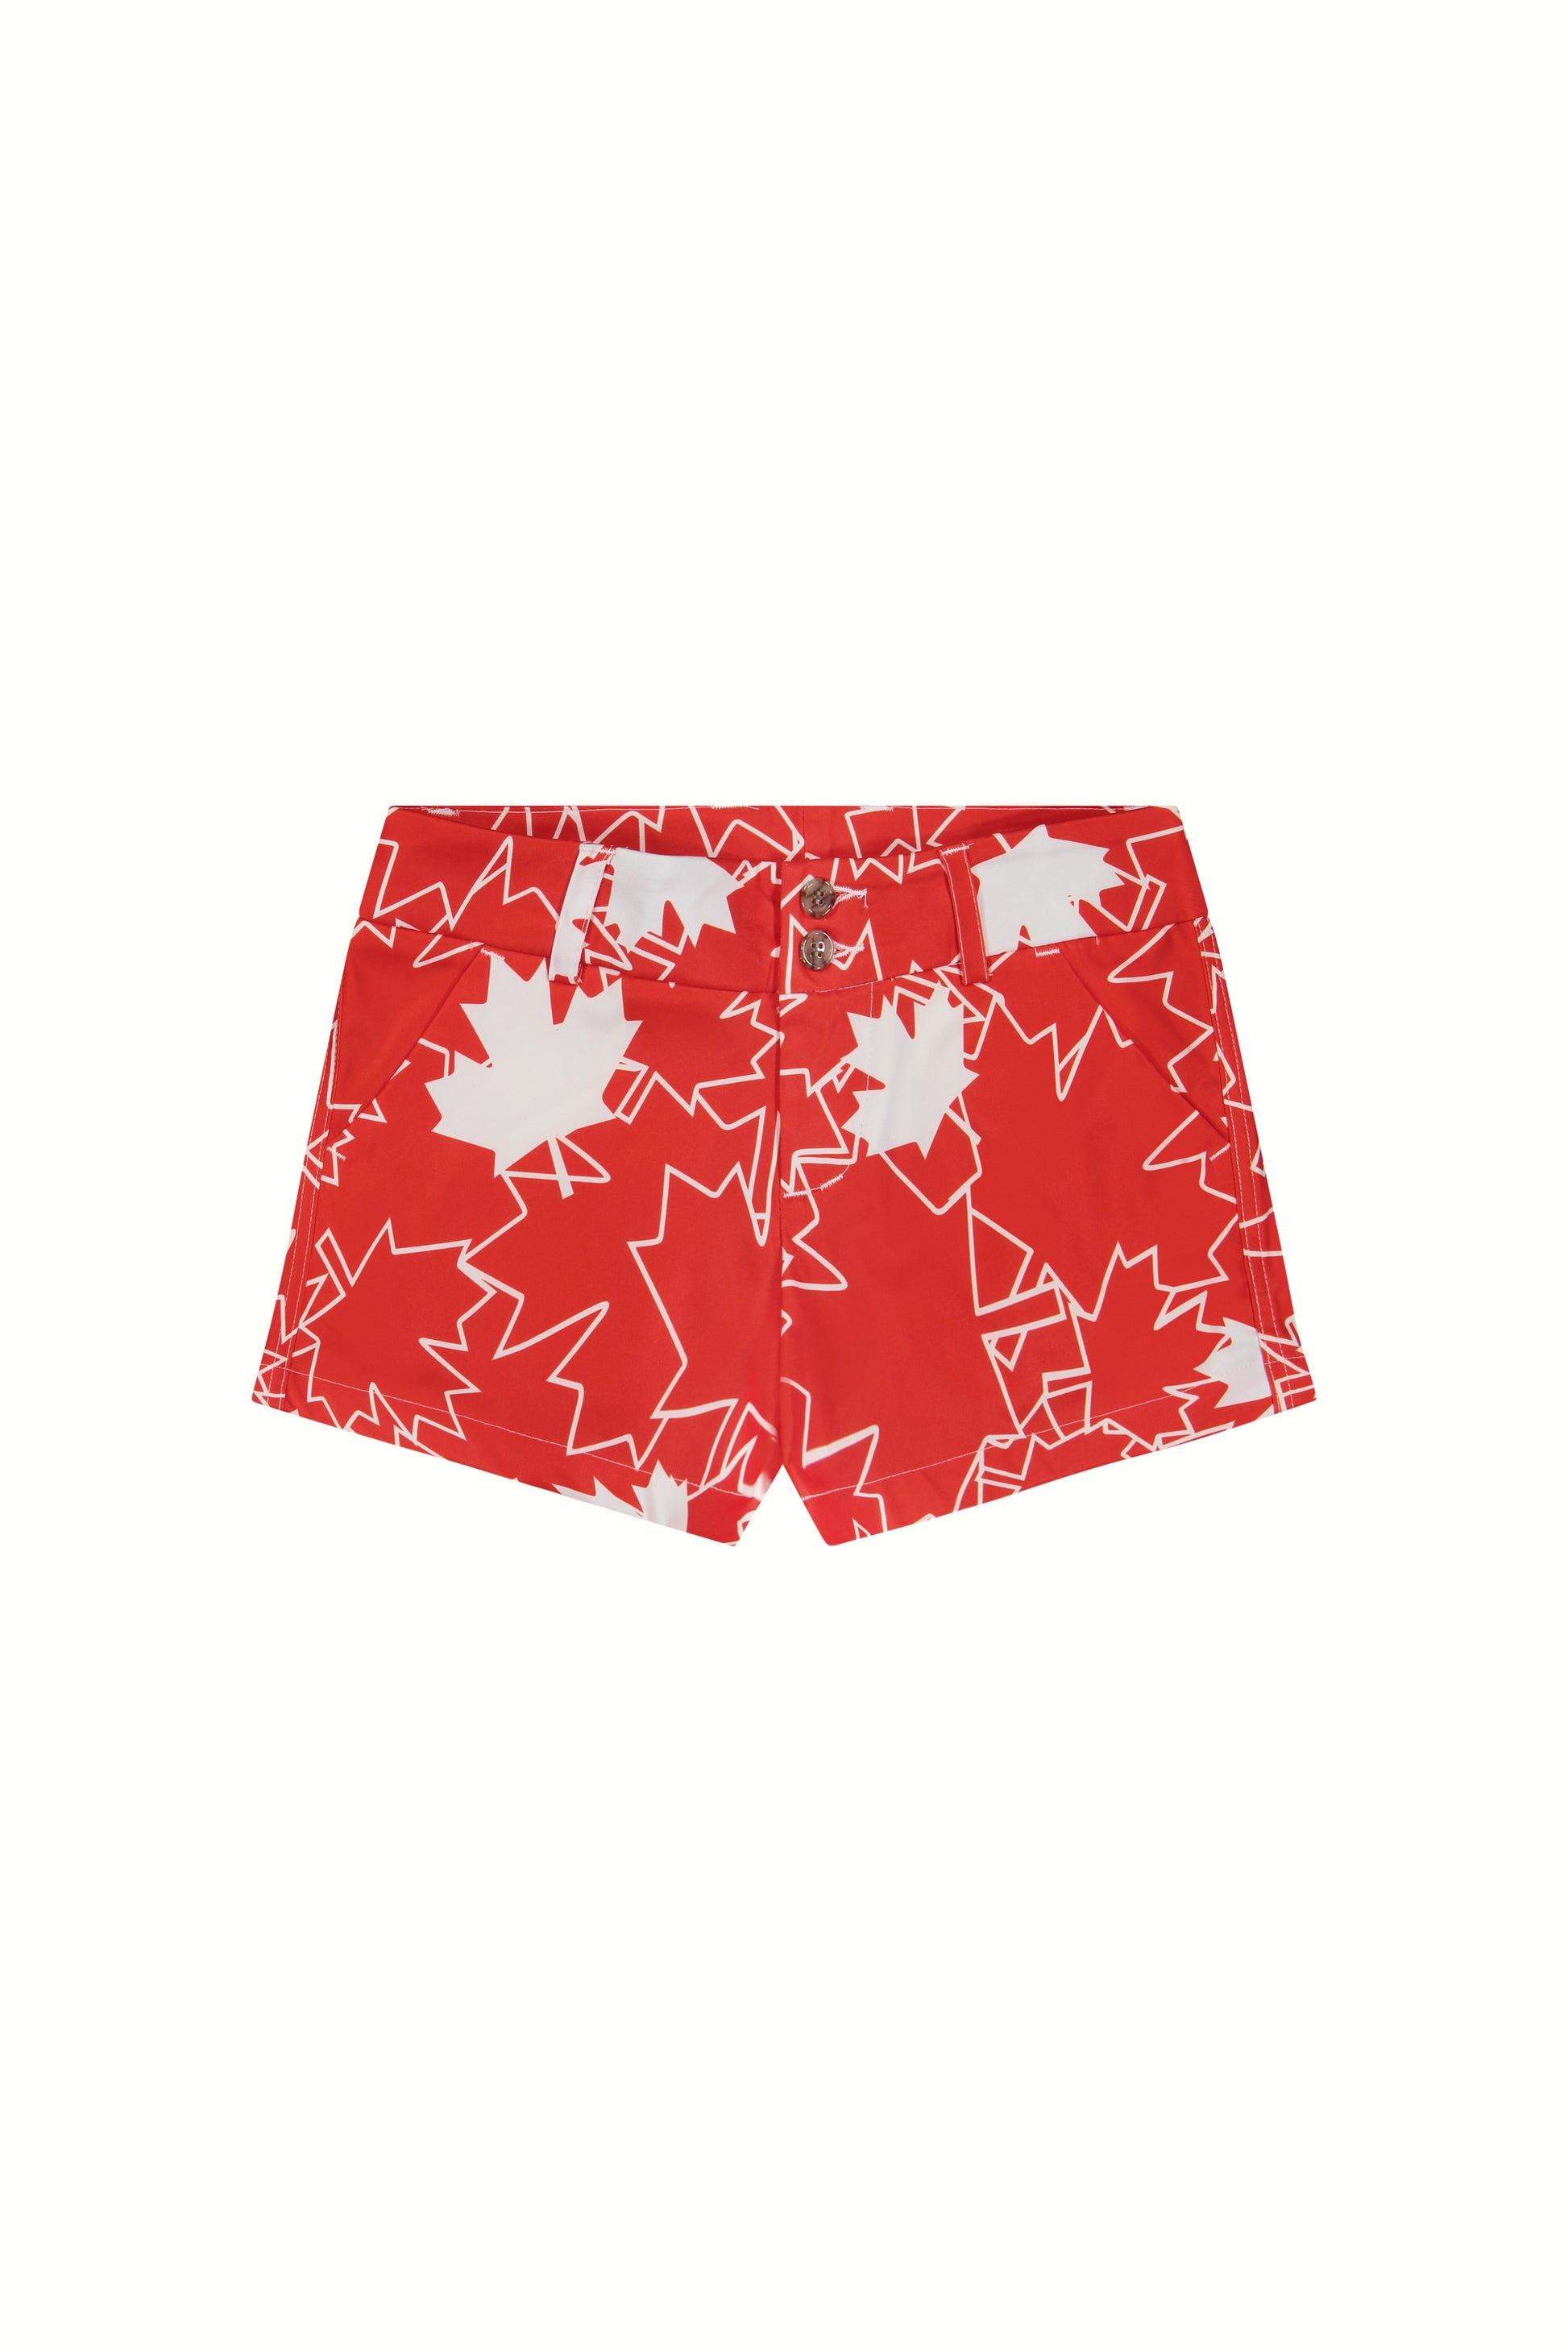 red and white Canada maple leaf patterned short